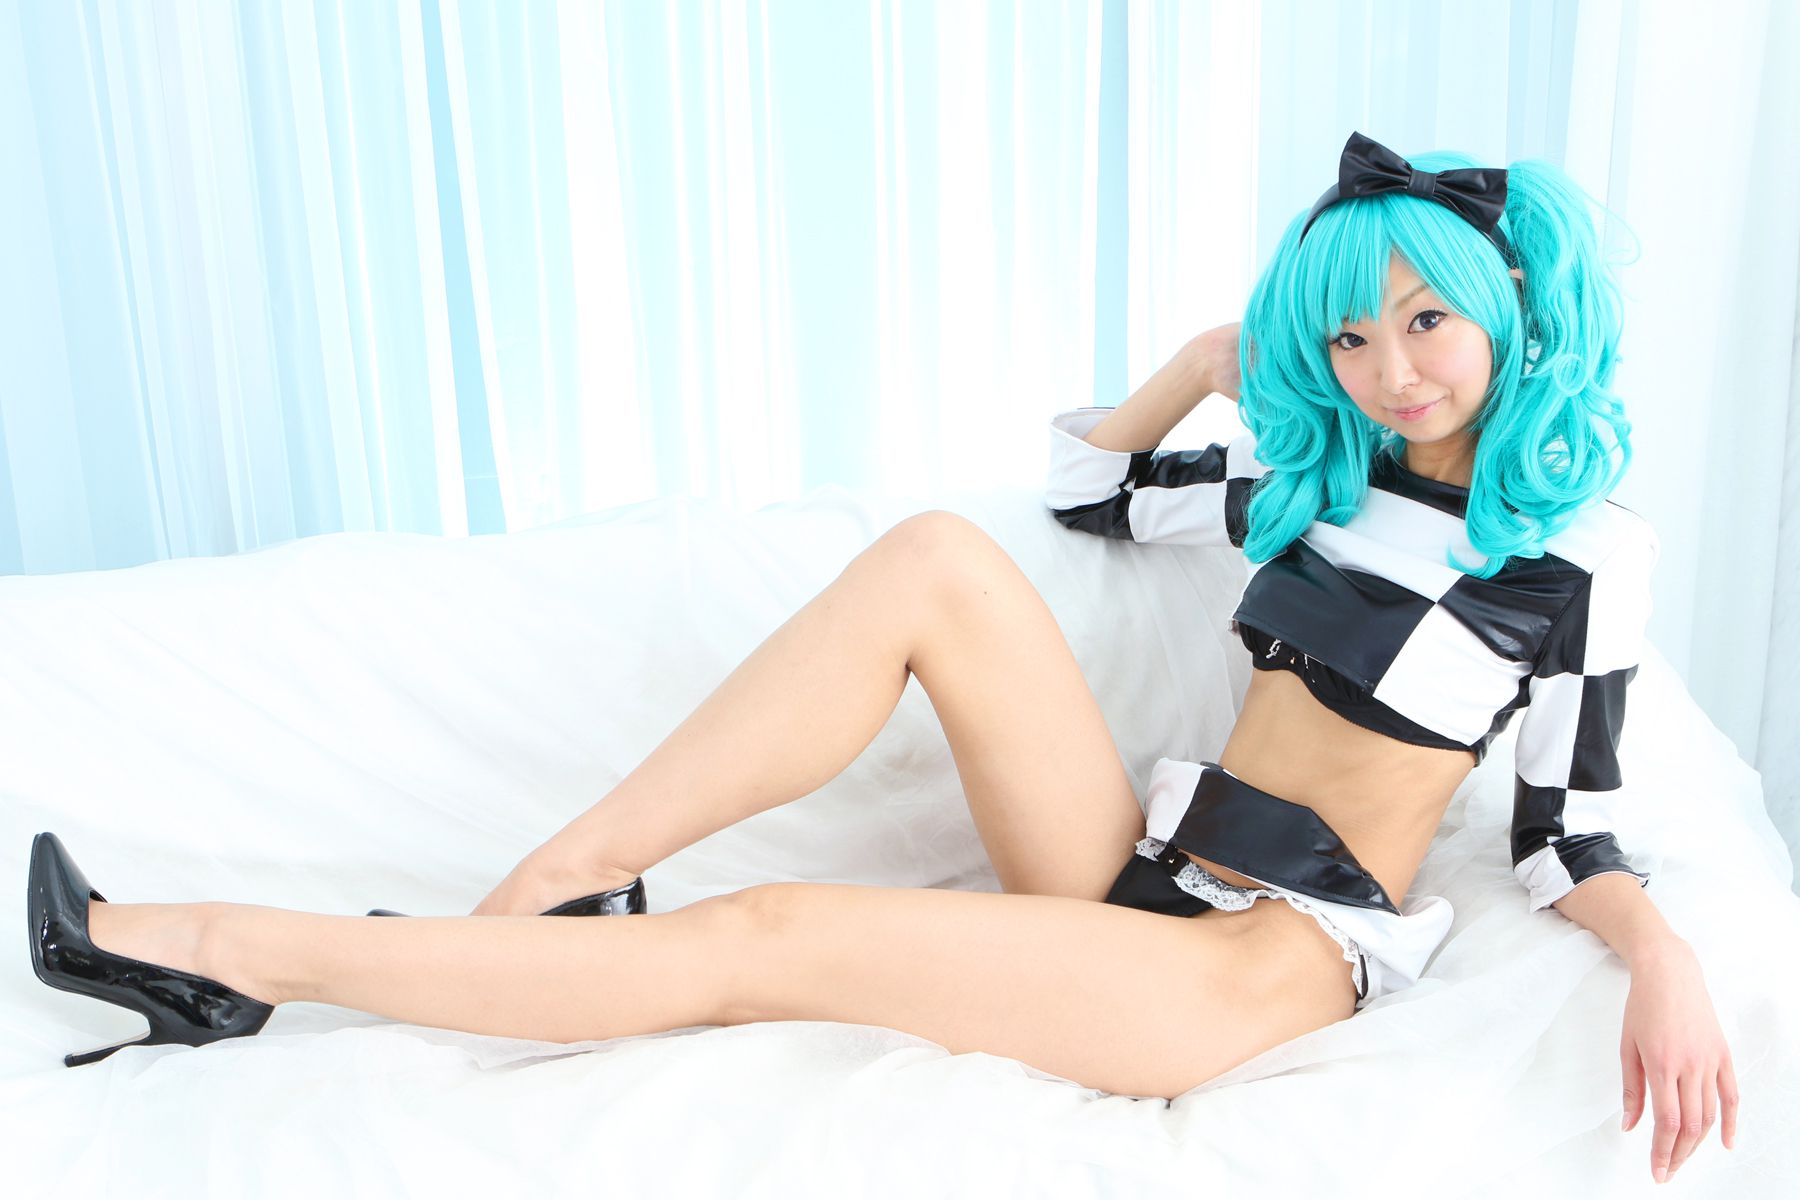 taotuhome[Cosplay套图] New Hatsune Miku from Vocaloid - So Sexy第31张